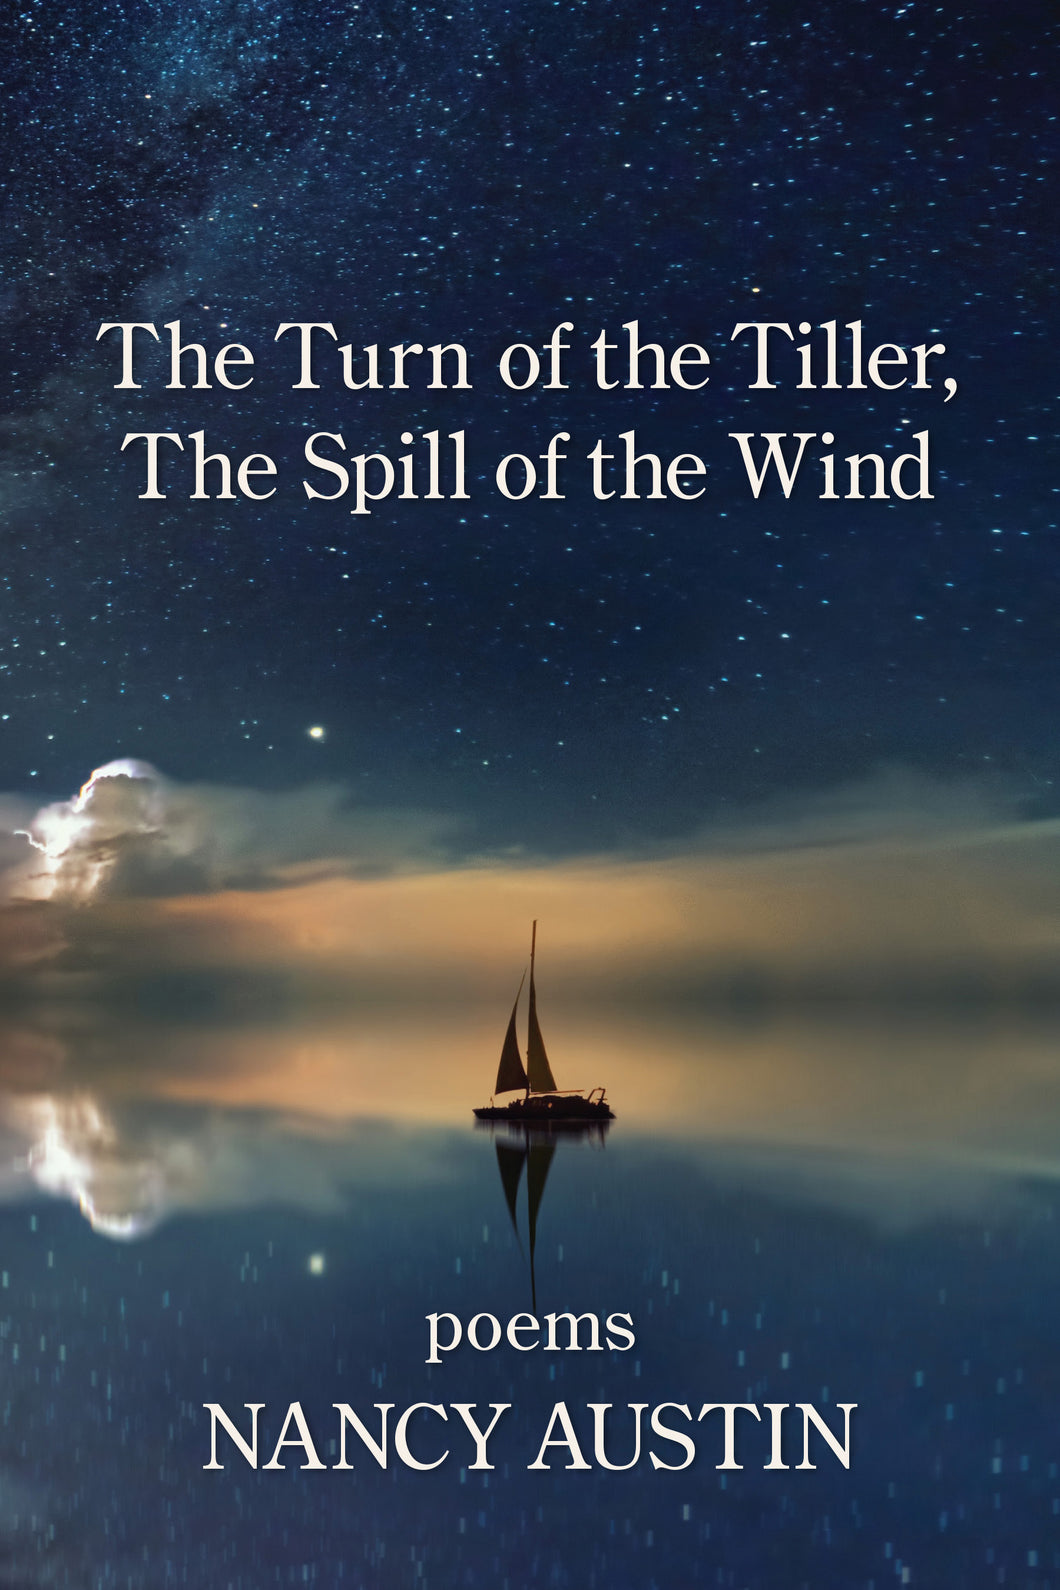 The Turn of the Tiller, The Spill of the Wind